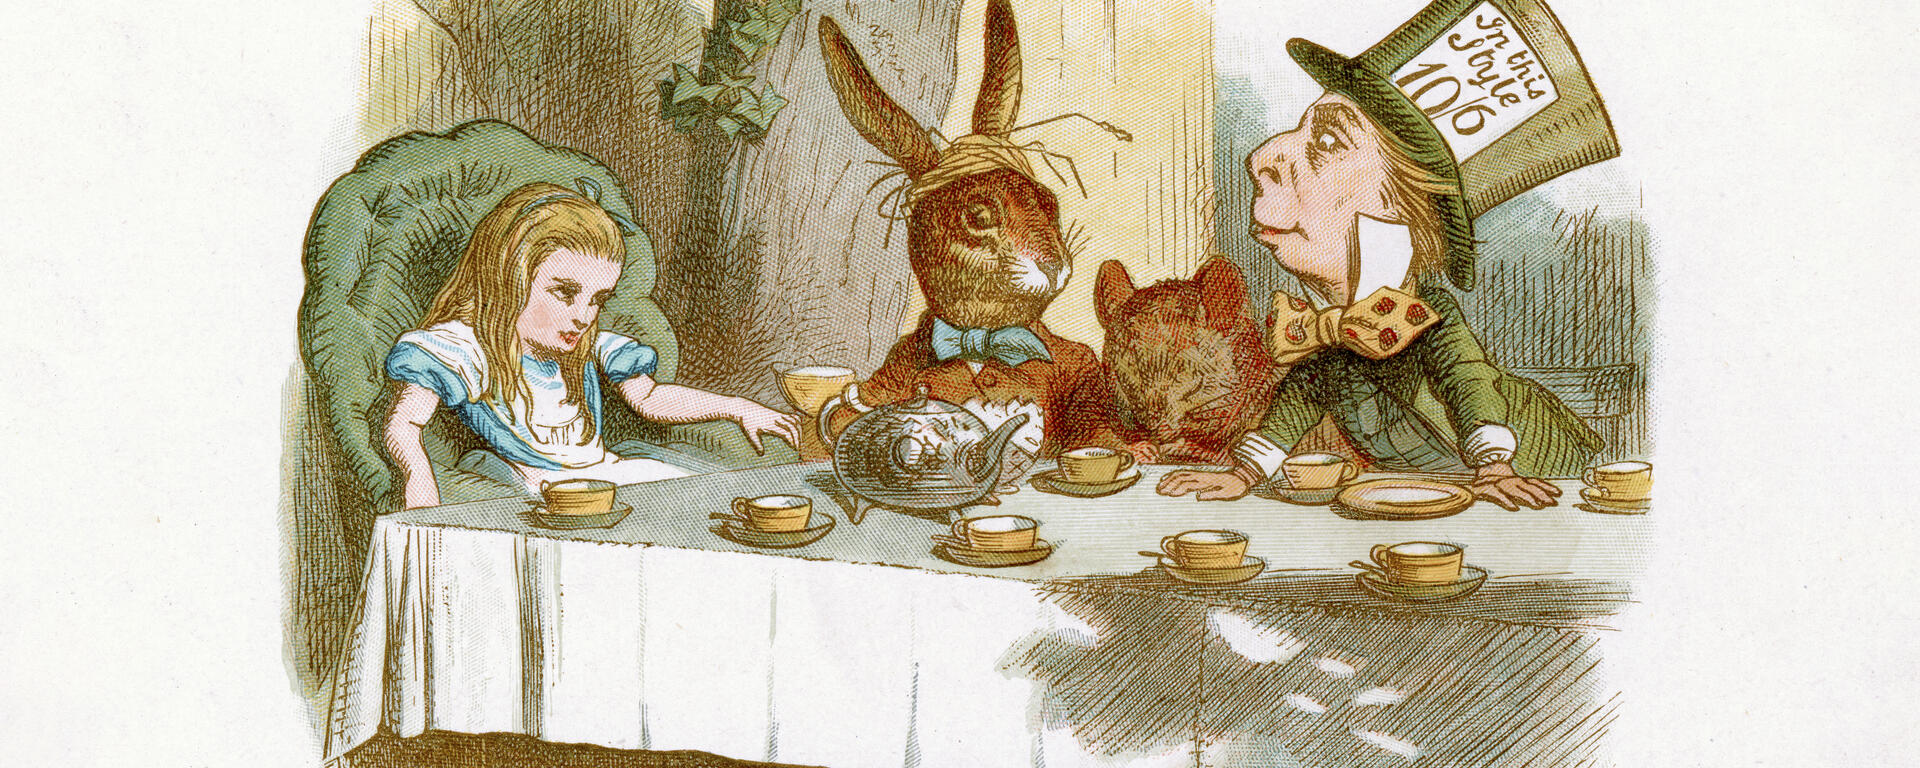 Alice in Wonderland has tea with the Rabbit and Mad Hatter